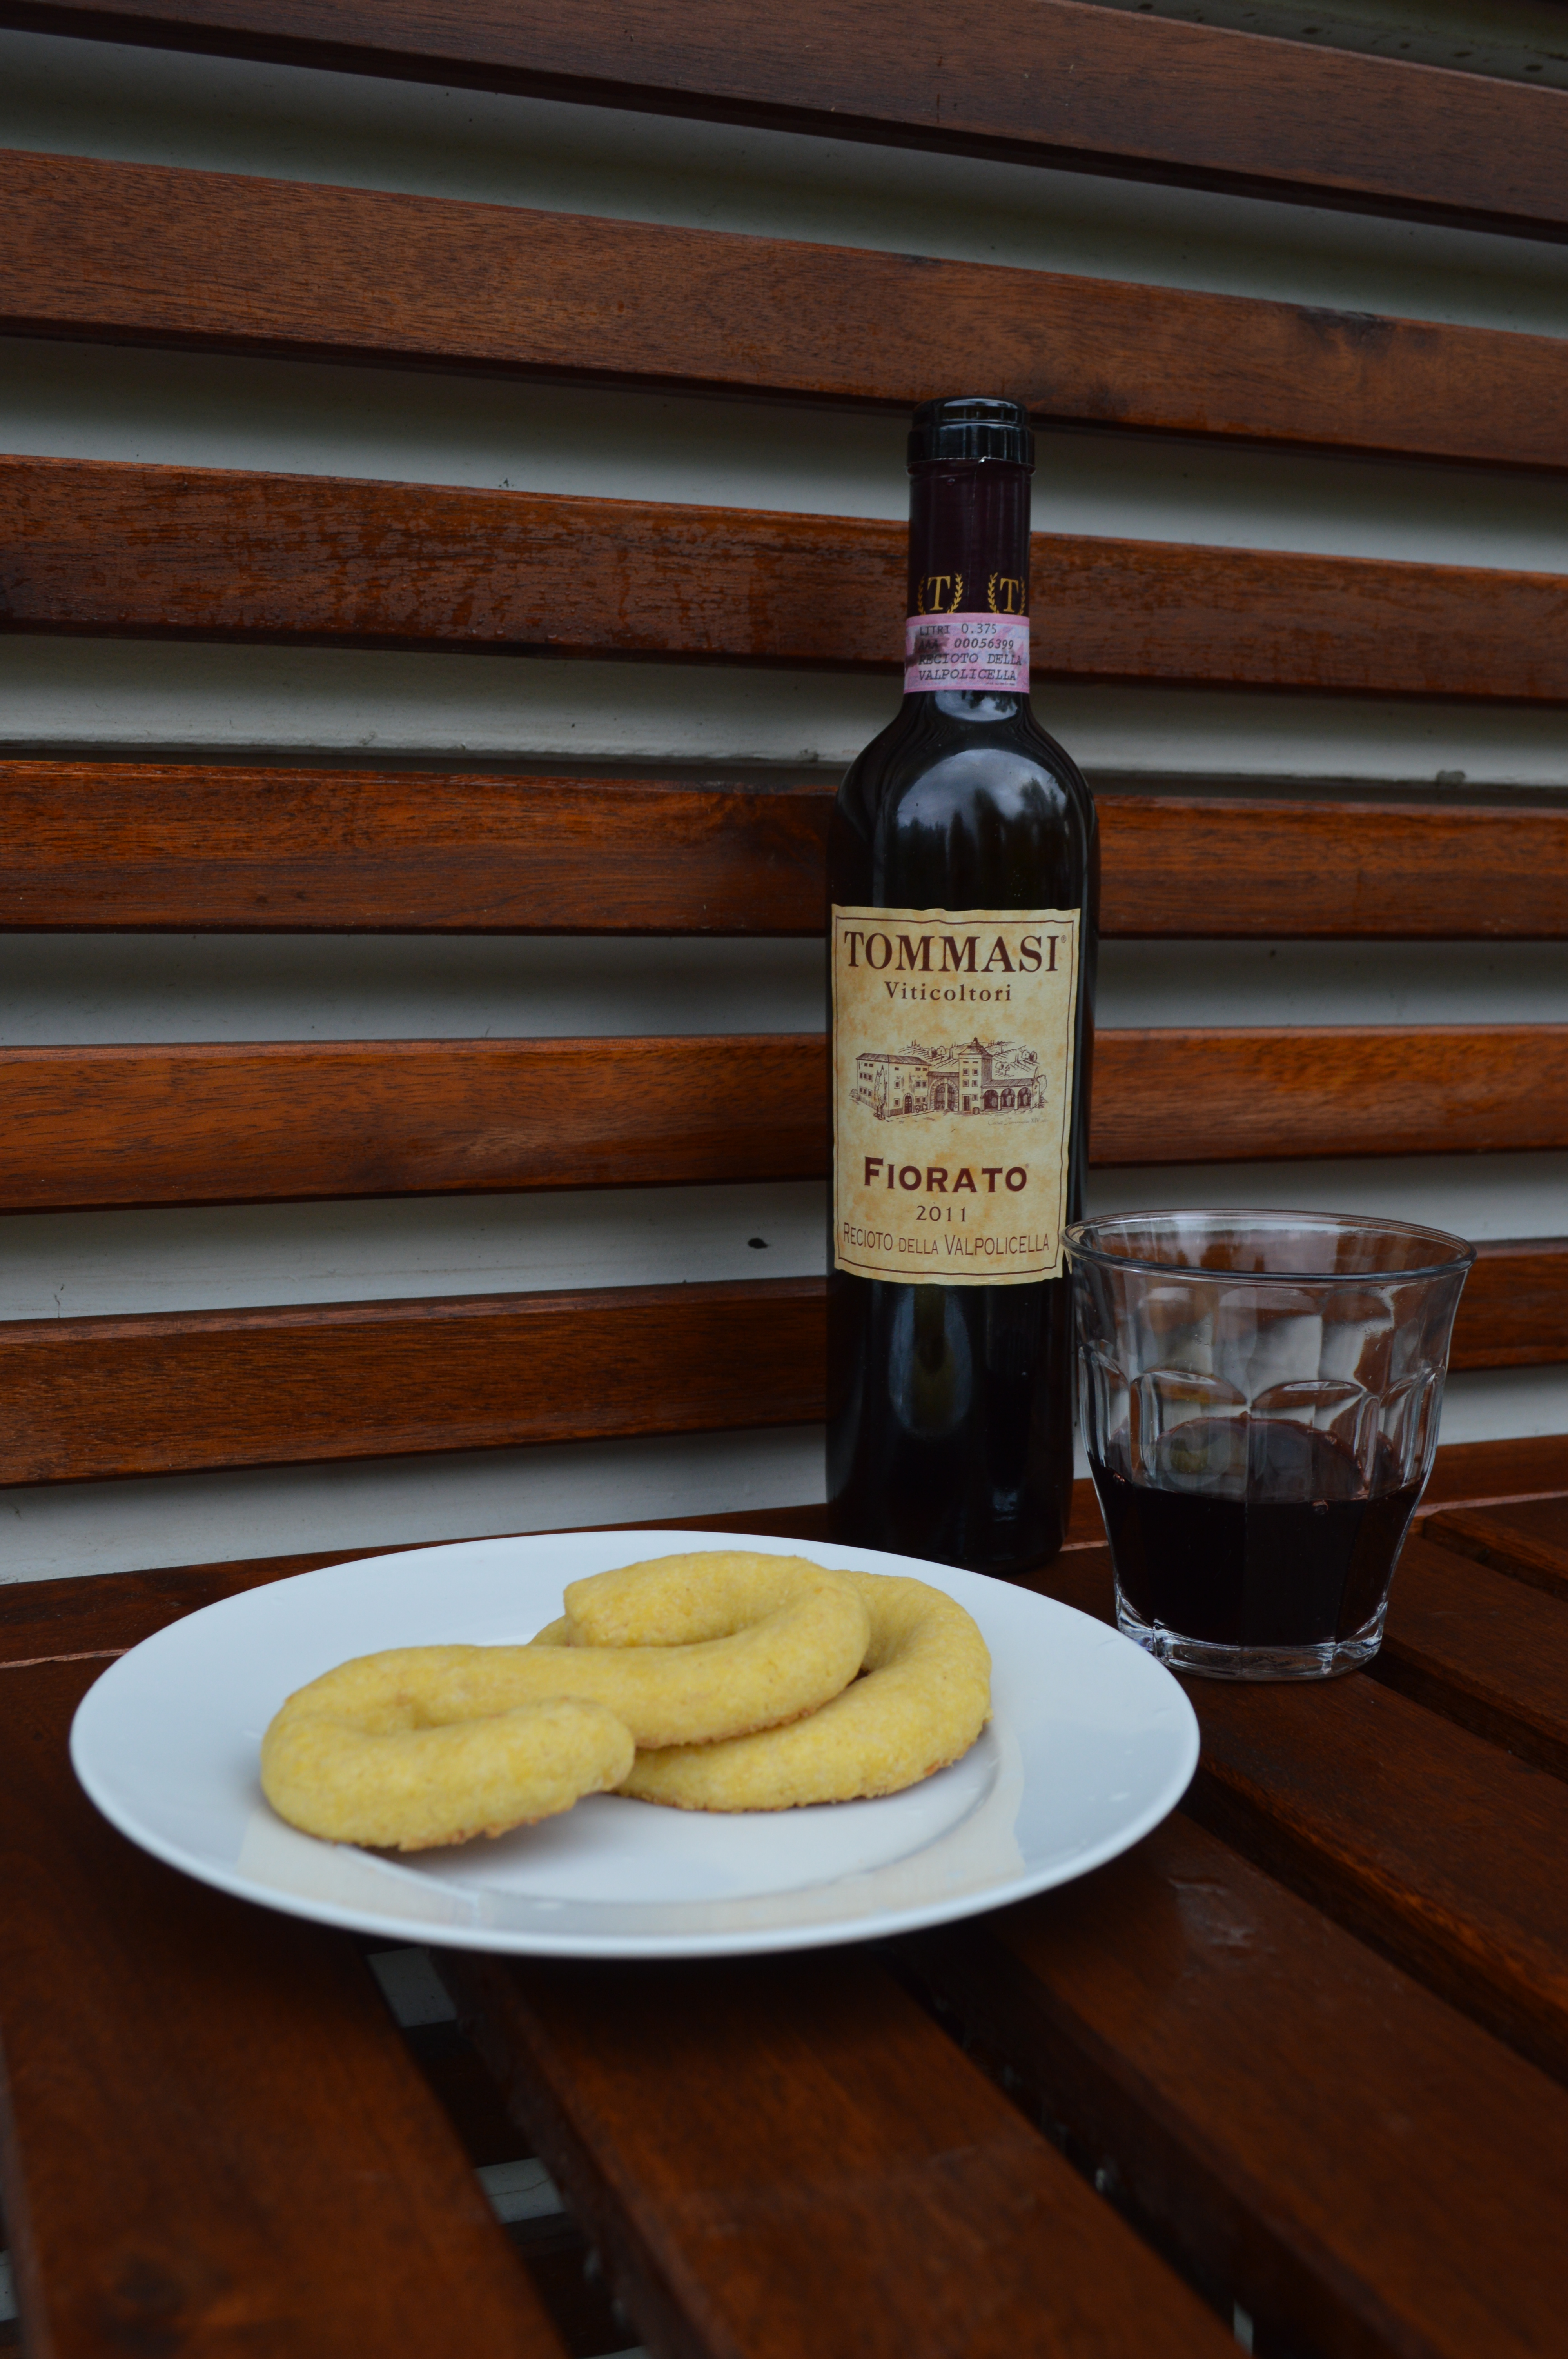 Buranelli cookies with Recioto, a sweet wine from Valpolicella.